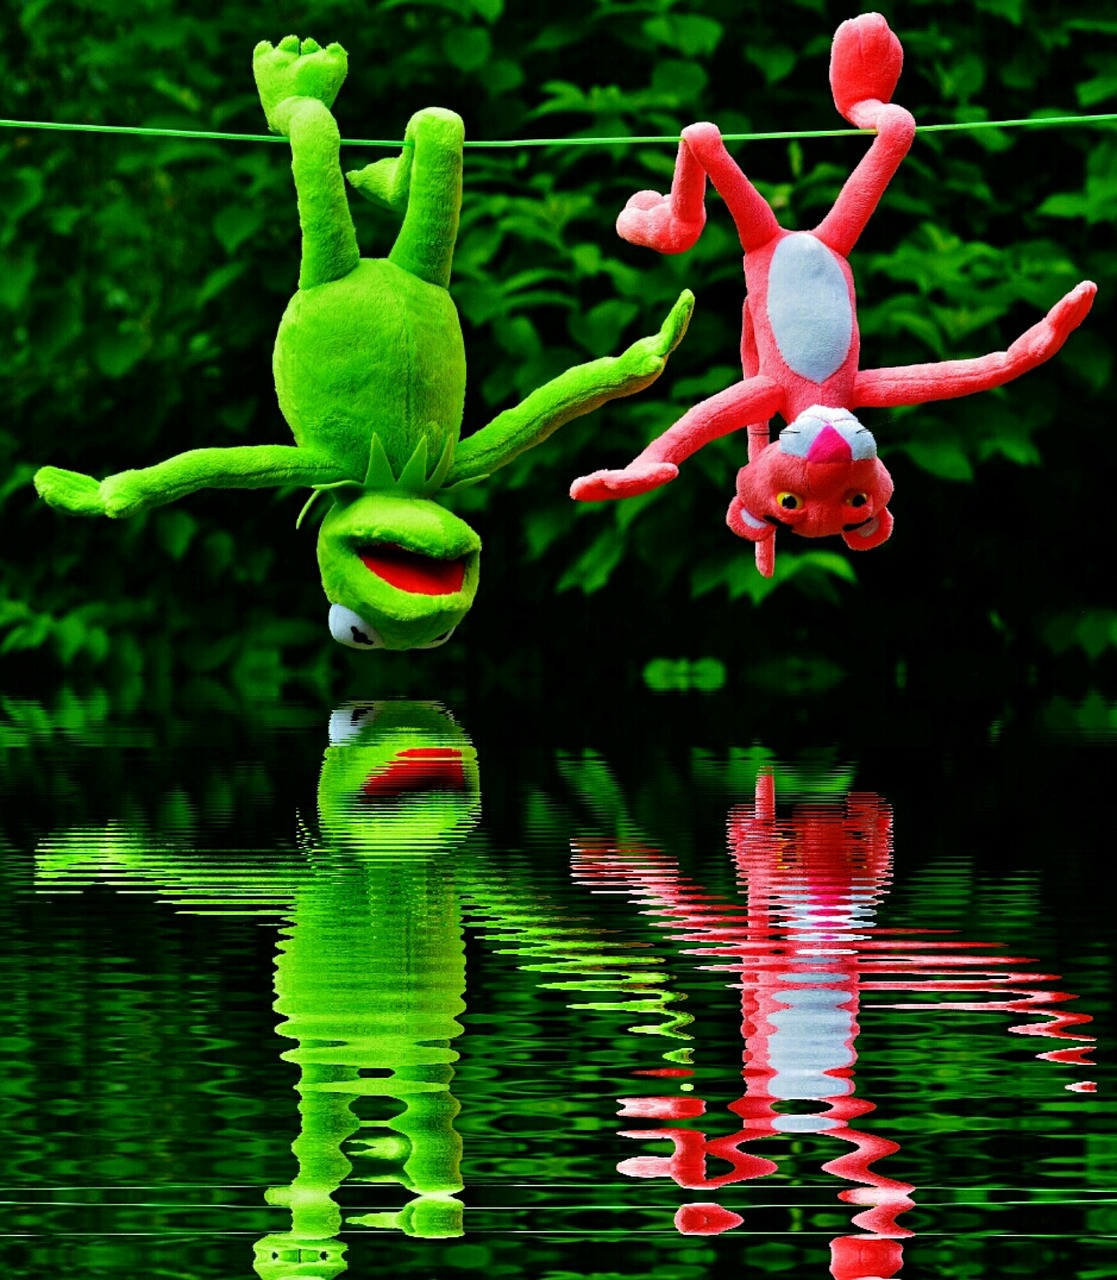 a frog hanging upside down over a body of water, by Jan Rustem, flickr, process art, clowns, river with low flying parrots, green bright red, voodoo!!